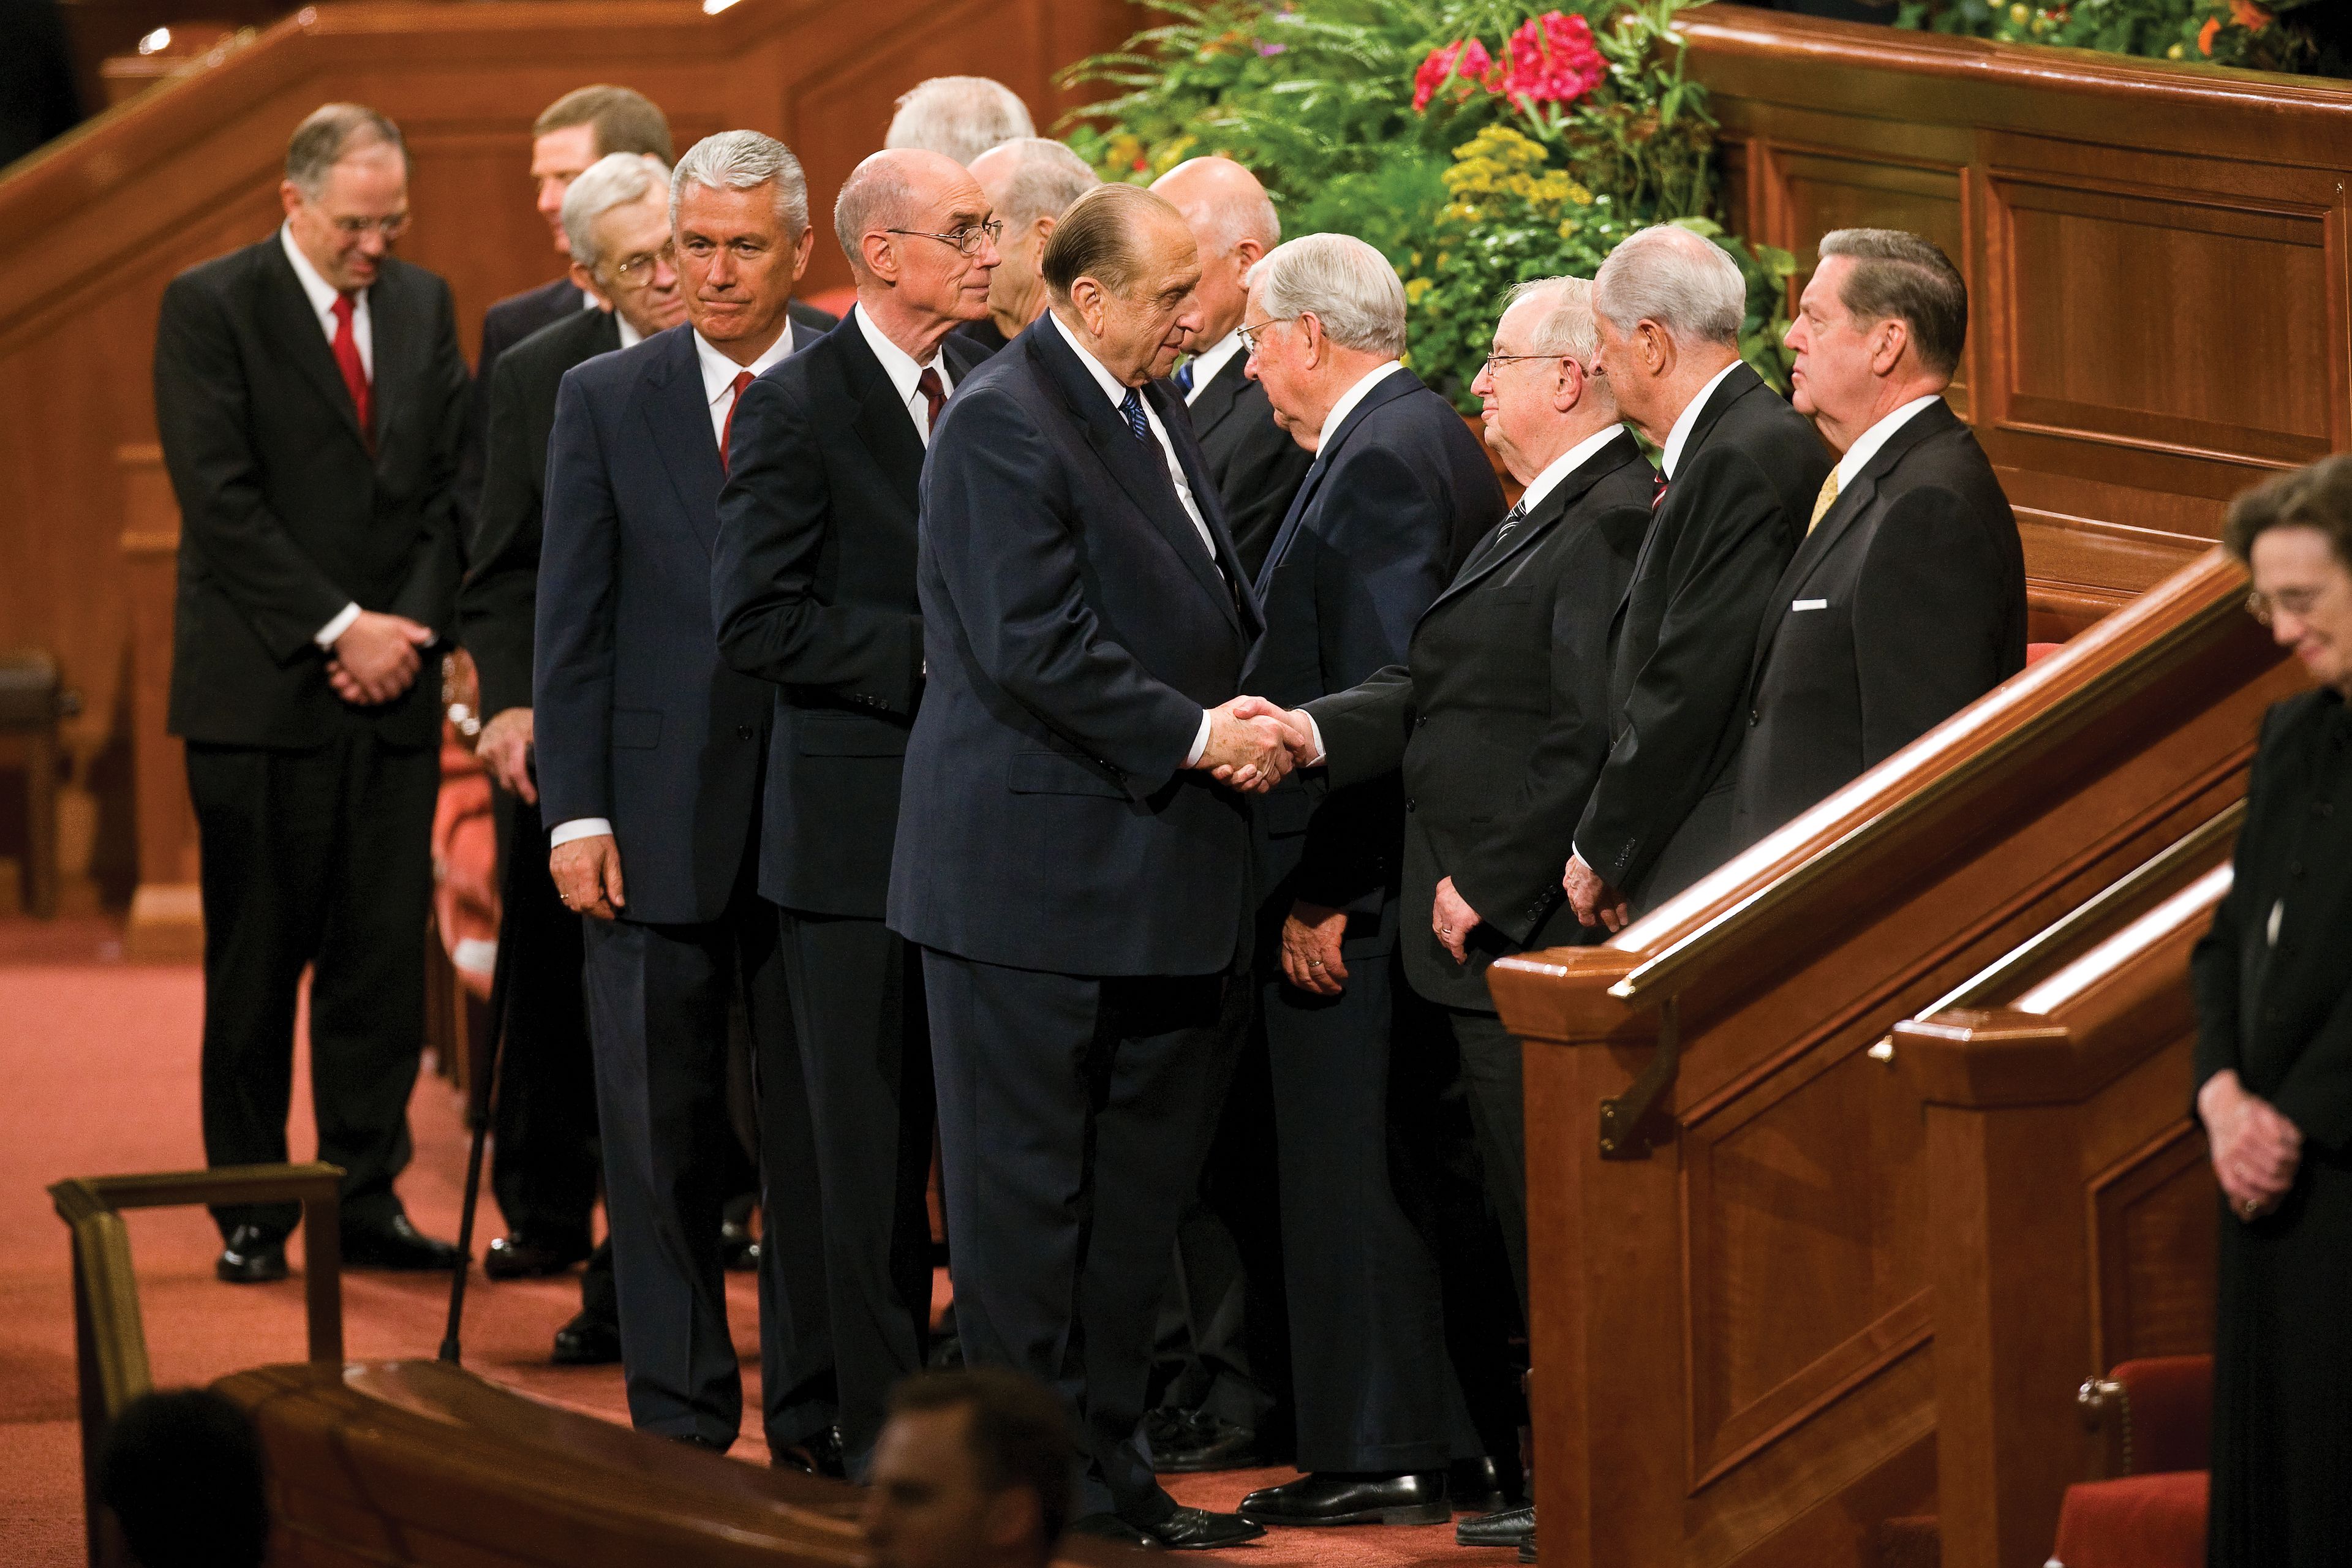 Thomas S. Monson shakes hands with members of the Quorum of the Twelve Apostles on the stand at the Conference Center.